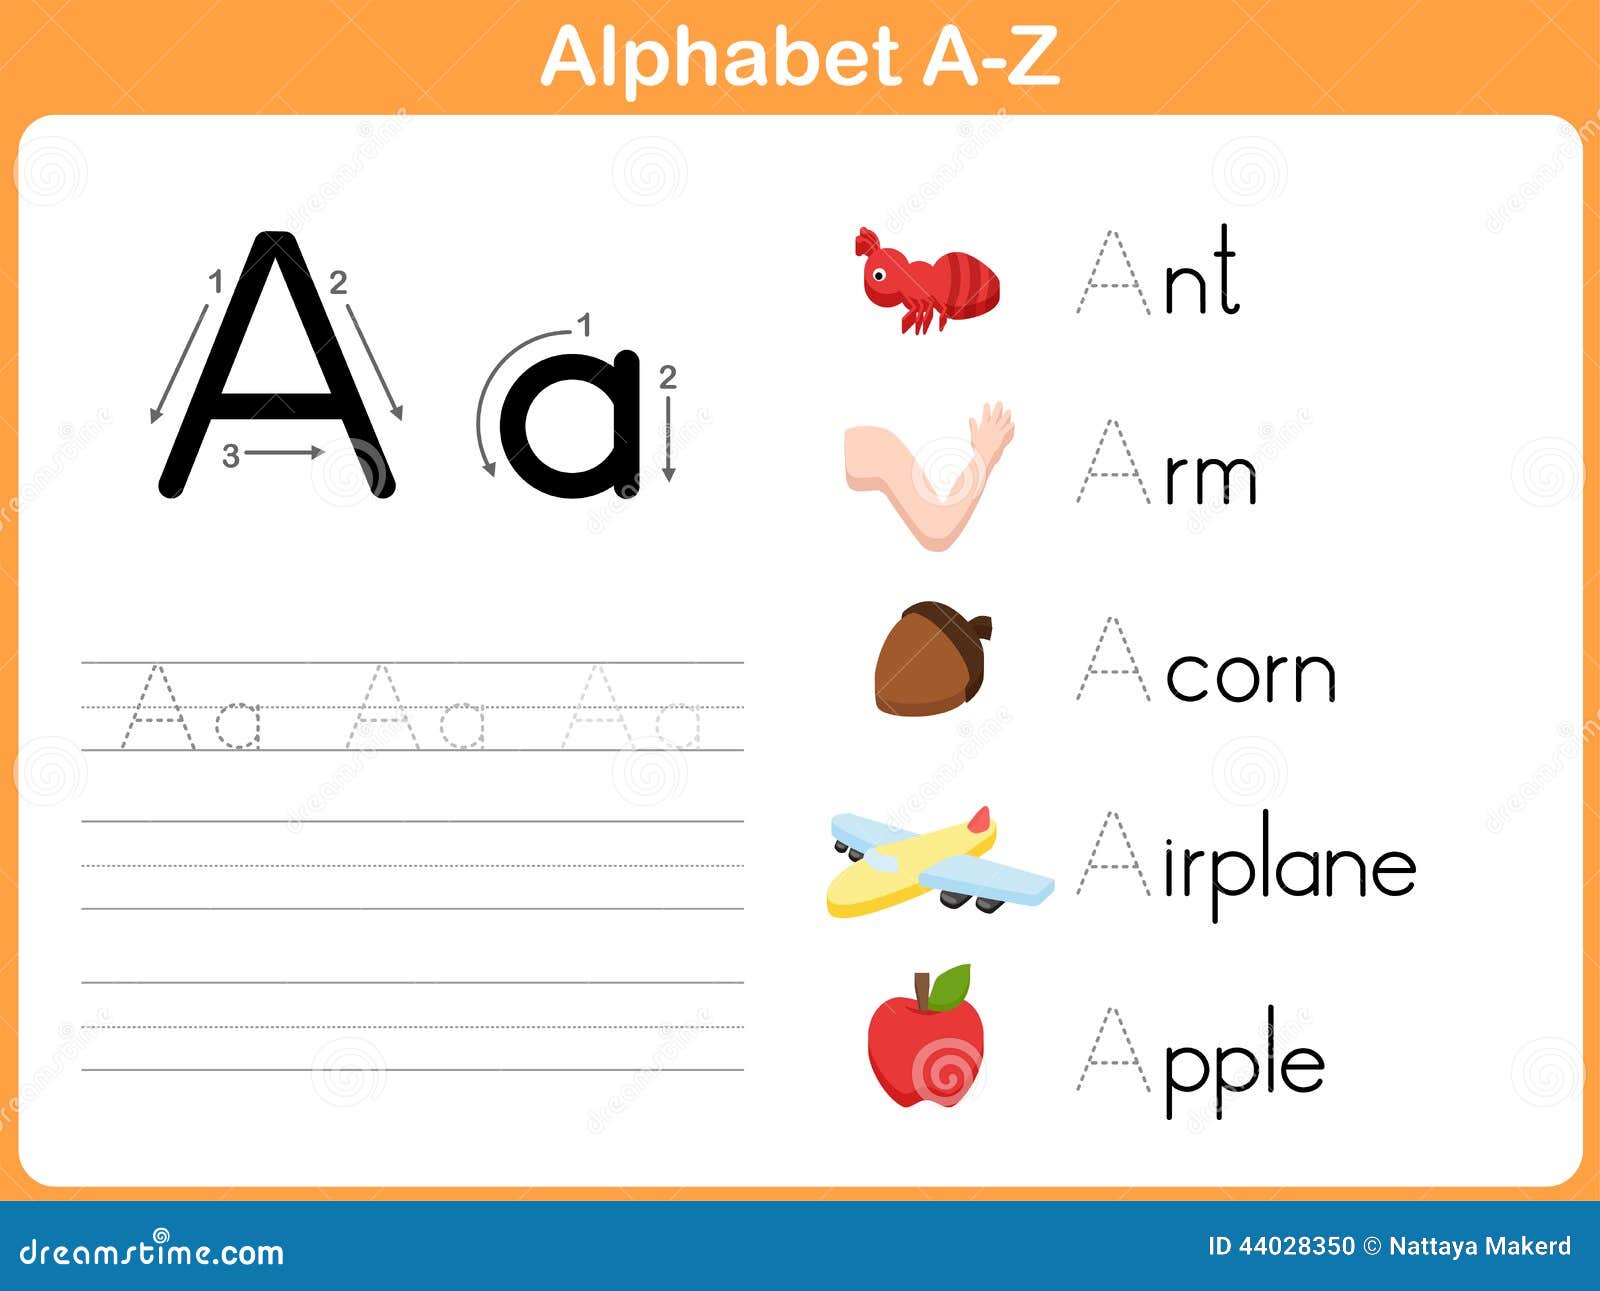 Printable Alphabet Tracing Worksheets A Z – Printable Editable  worksheets for teachers, printable worksheets, multiplication, free worksheets, and math worksheets Tracing Letters A Z Worksheet 1066 x 1300